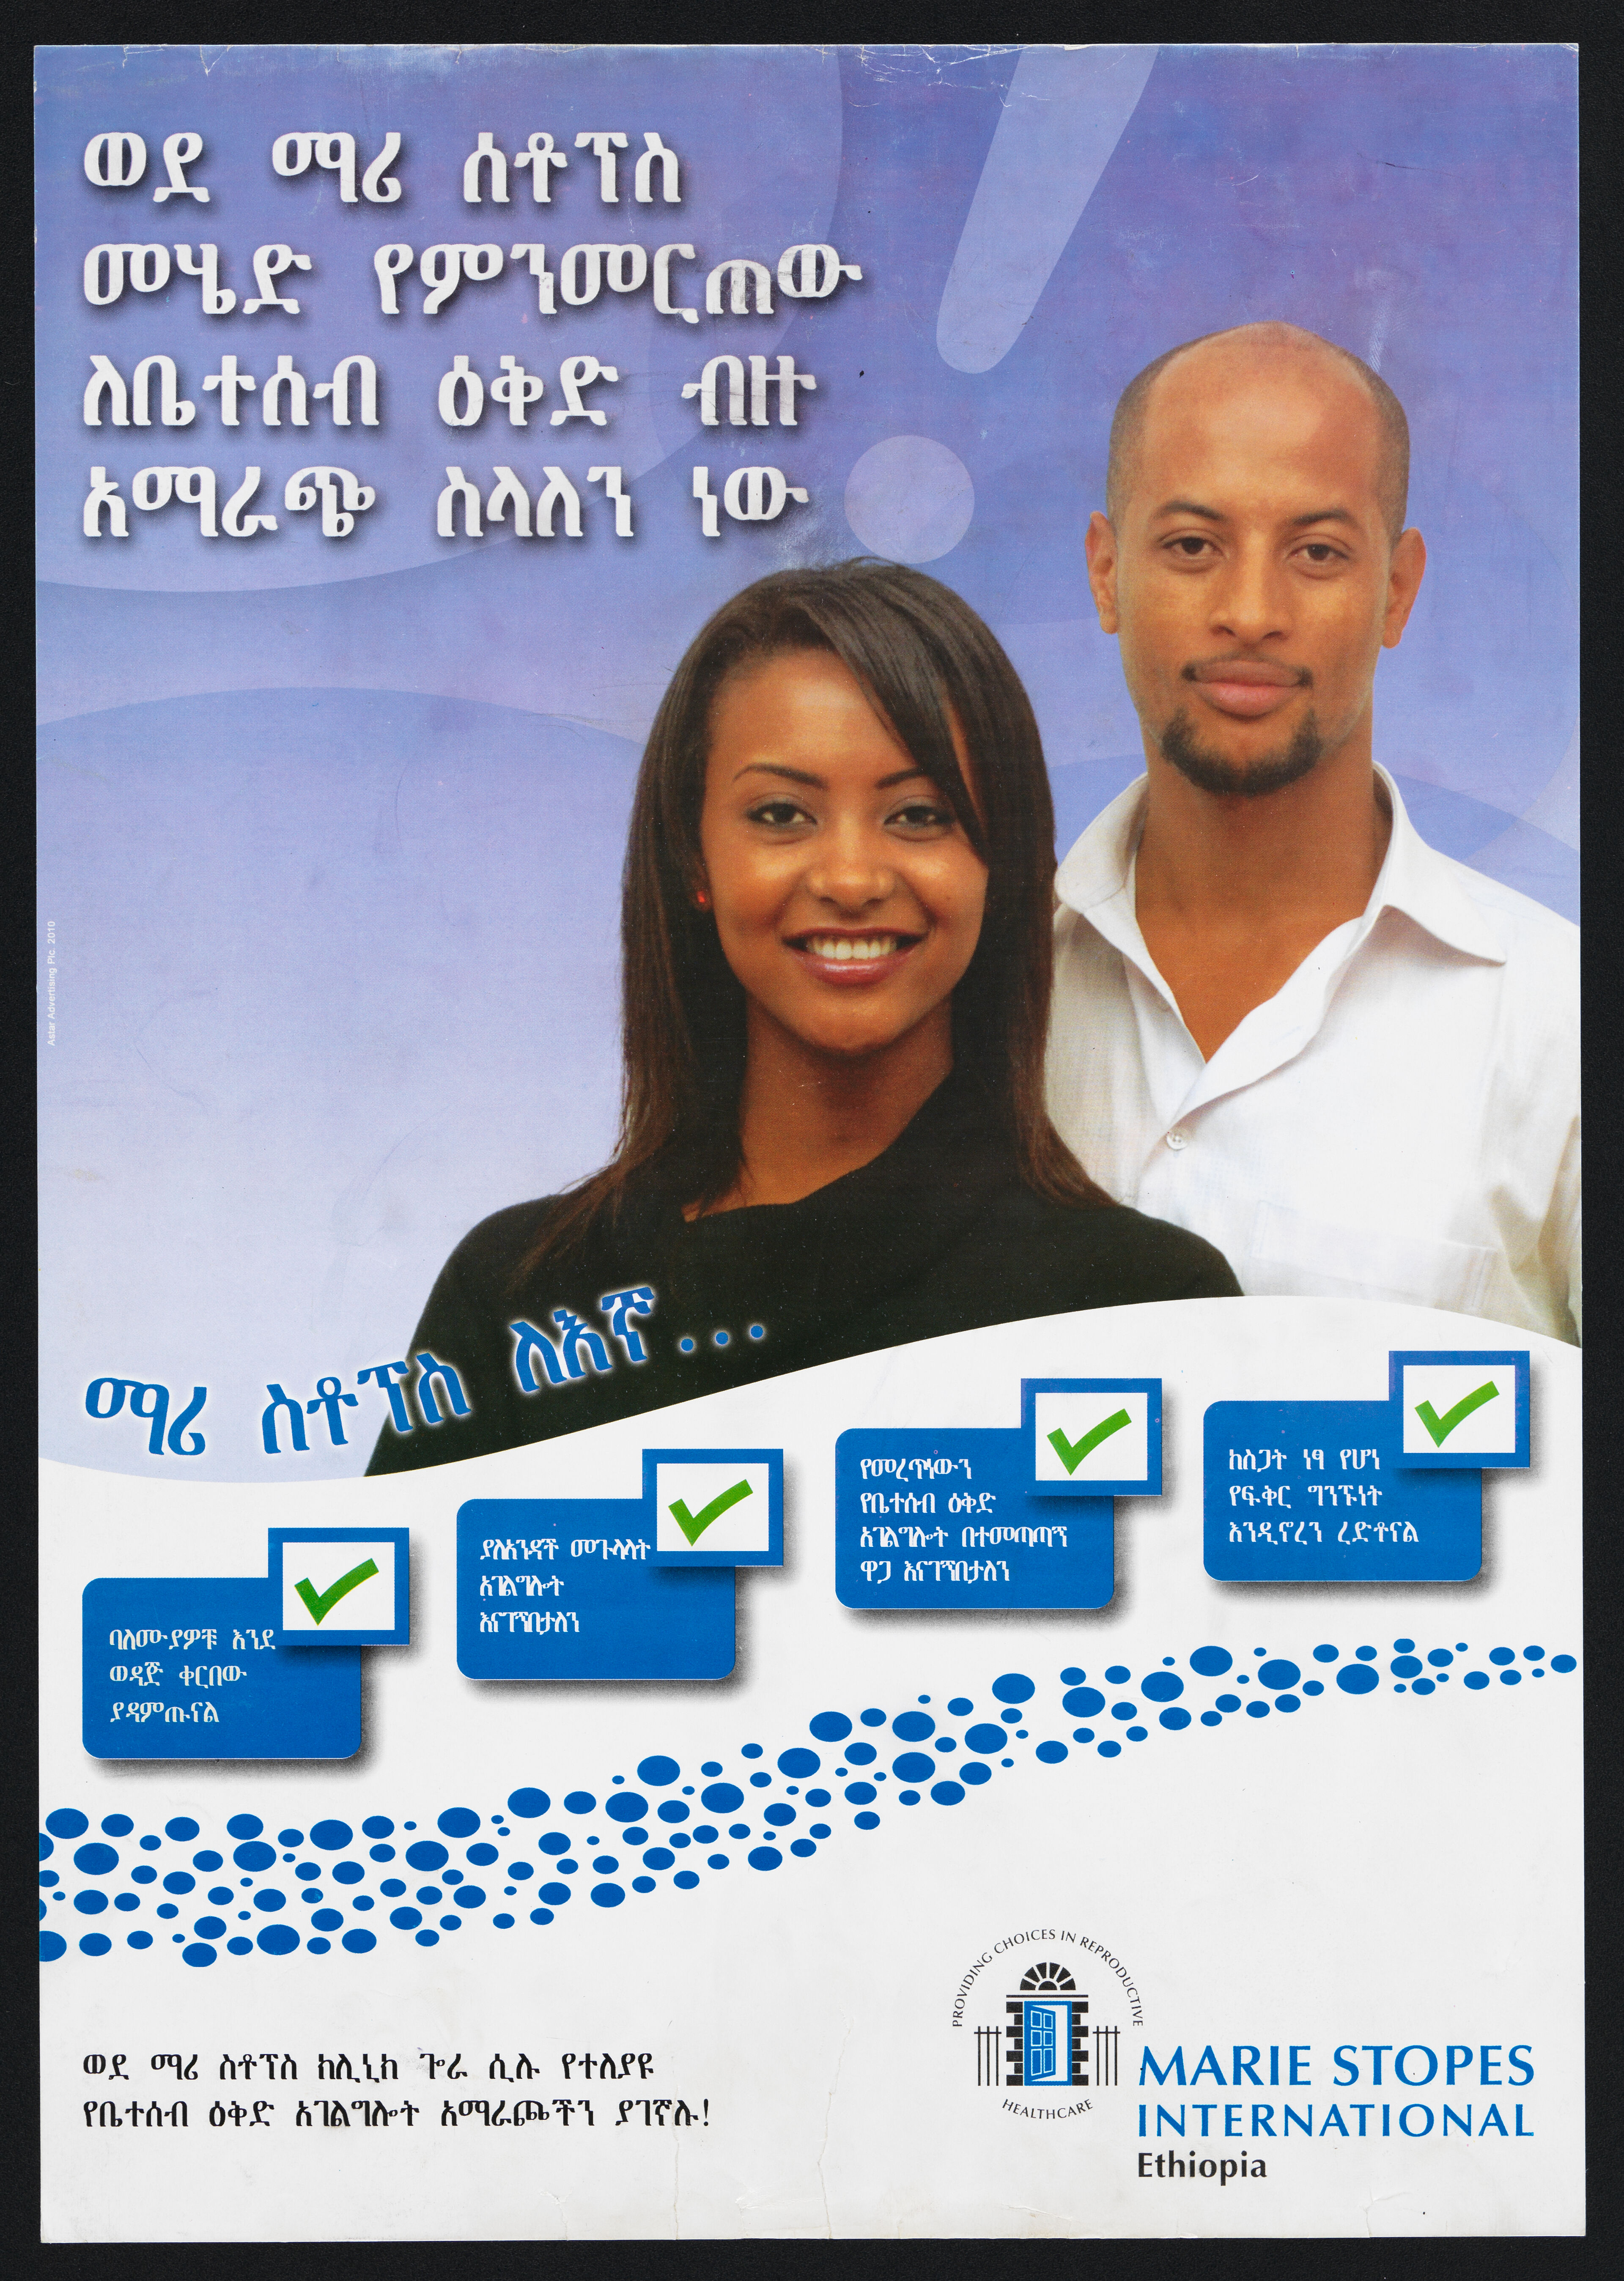 A man and woman representing Marie Stopes International in Ethiopia. Colour lithograph by Astar Advertising, 2010.